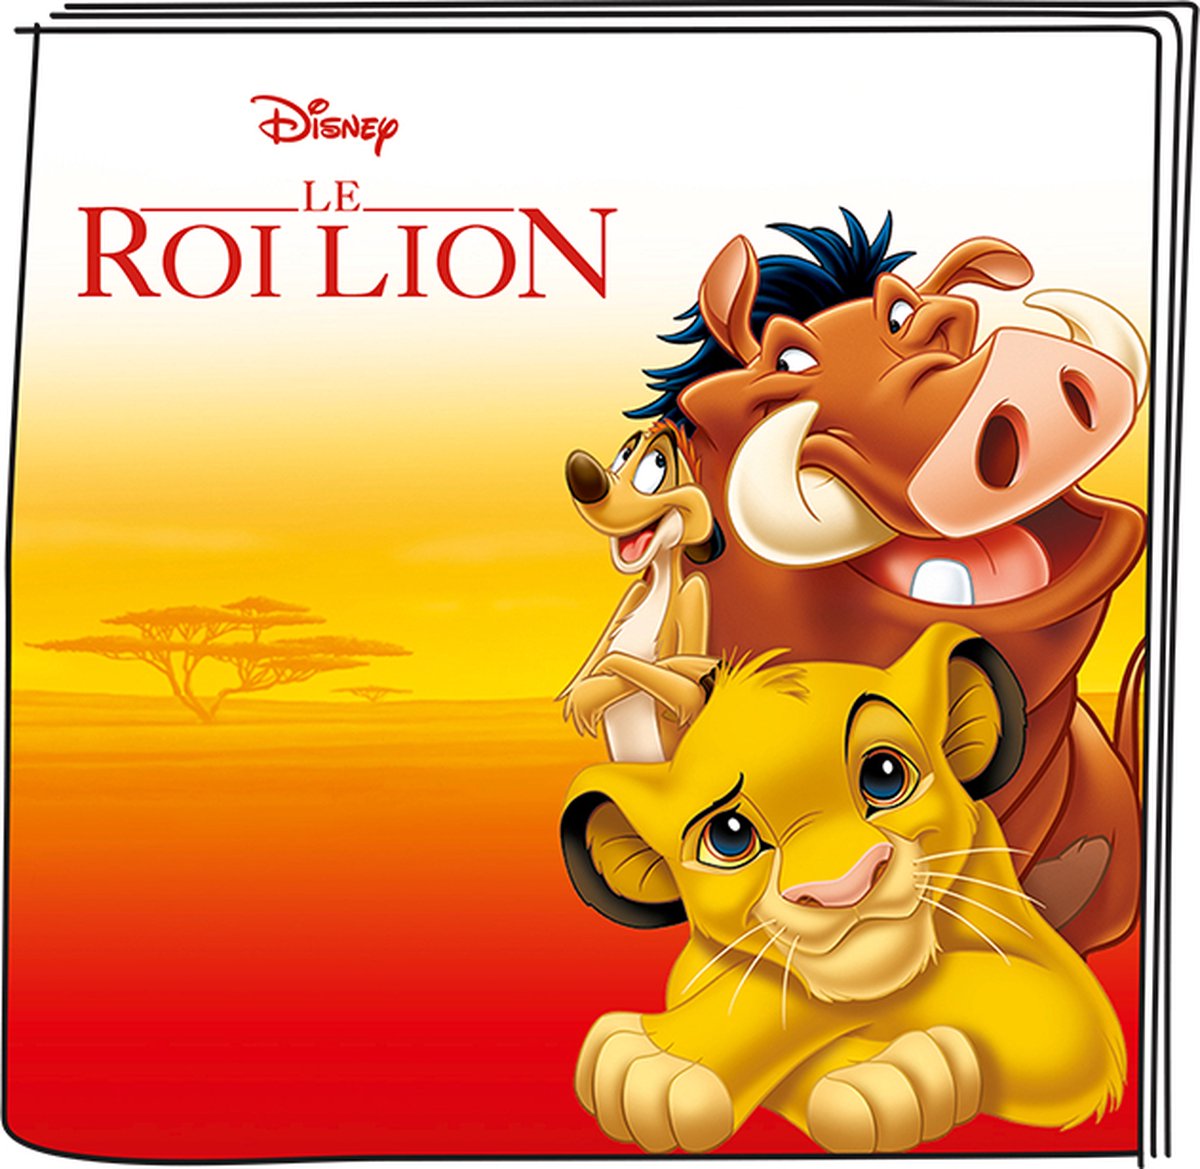 Tonies - The Lion King - French Edition